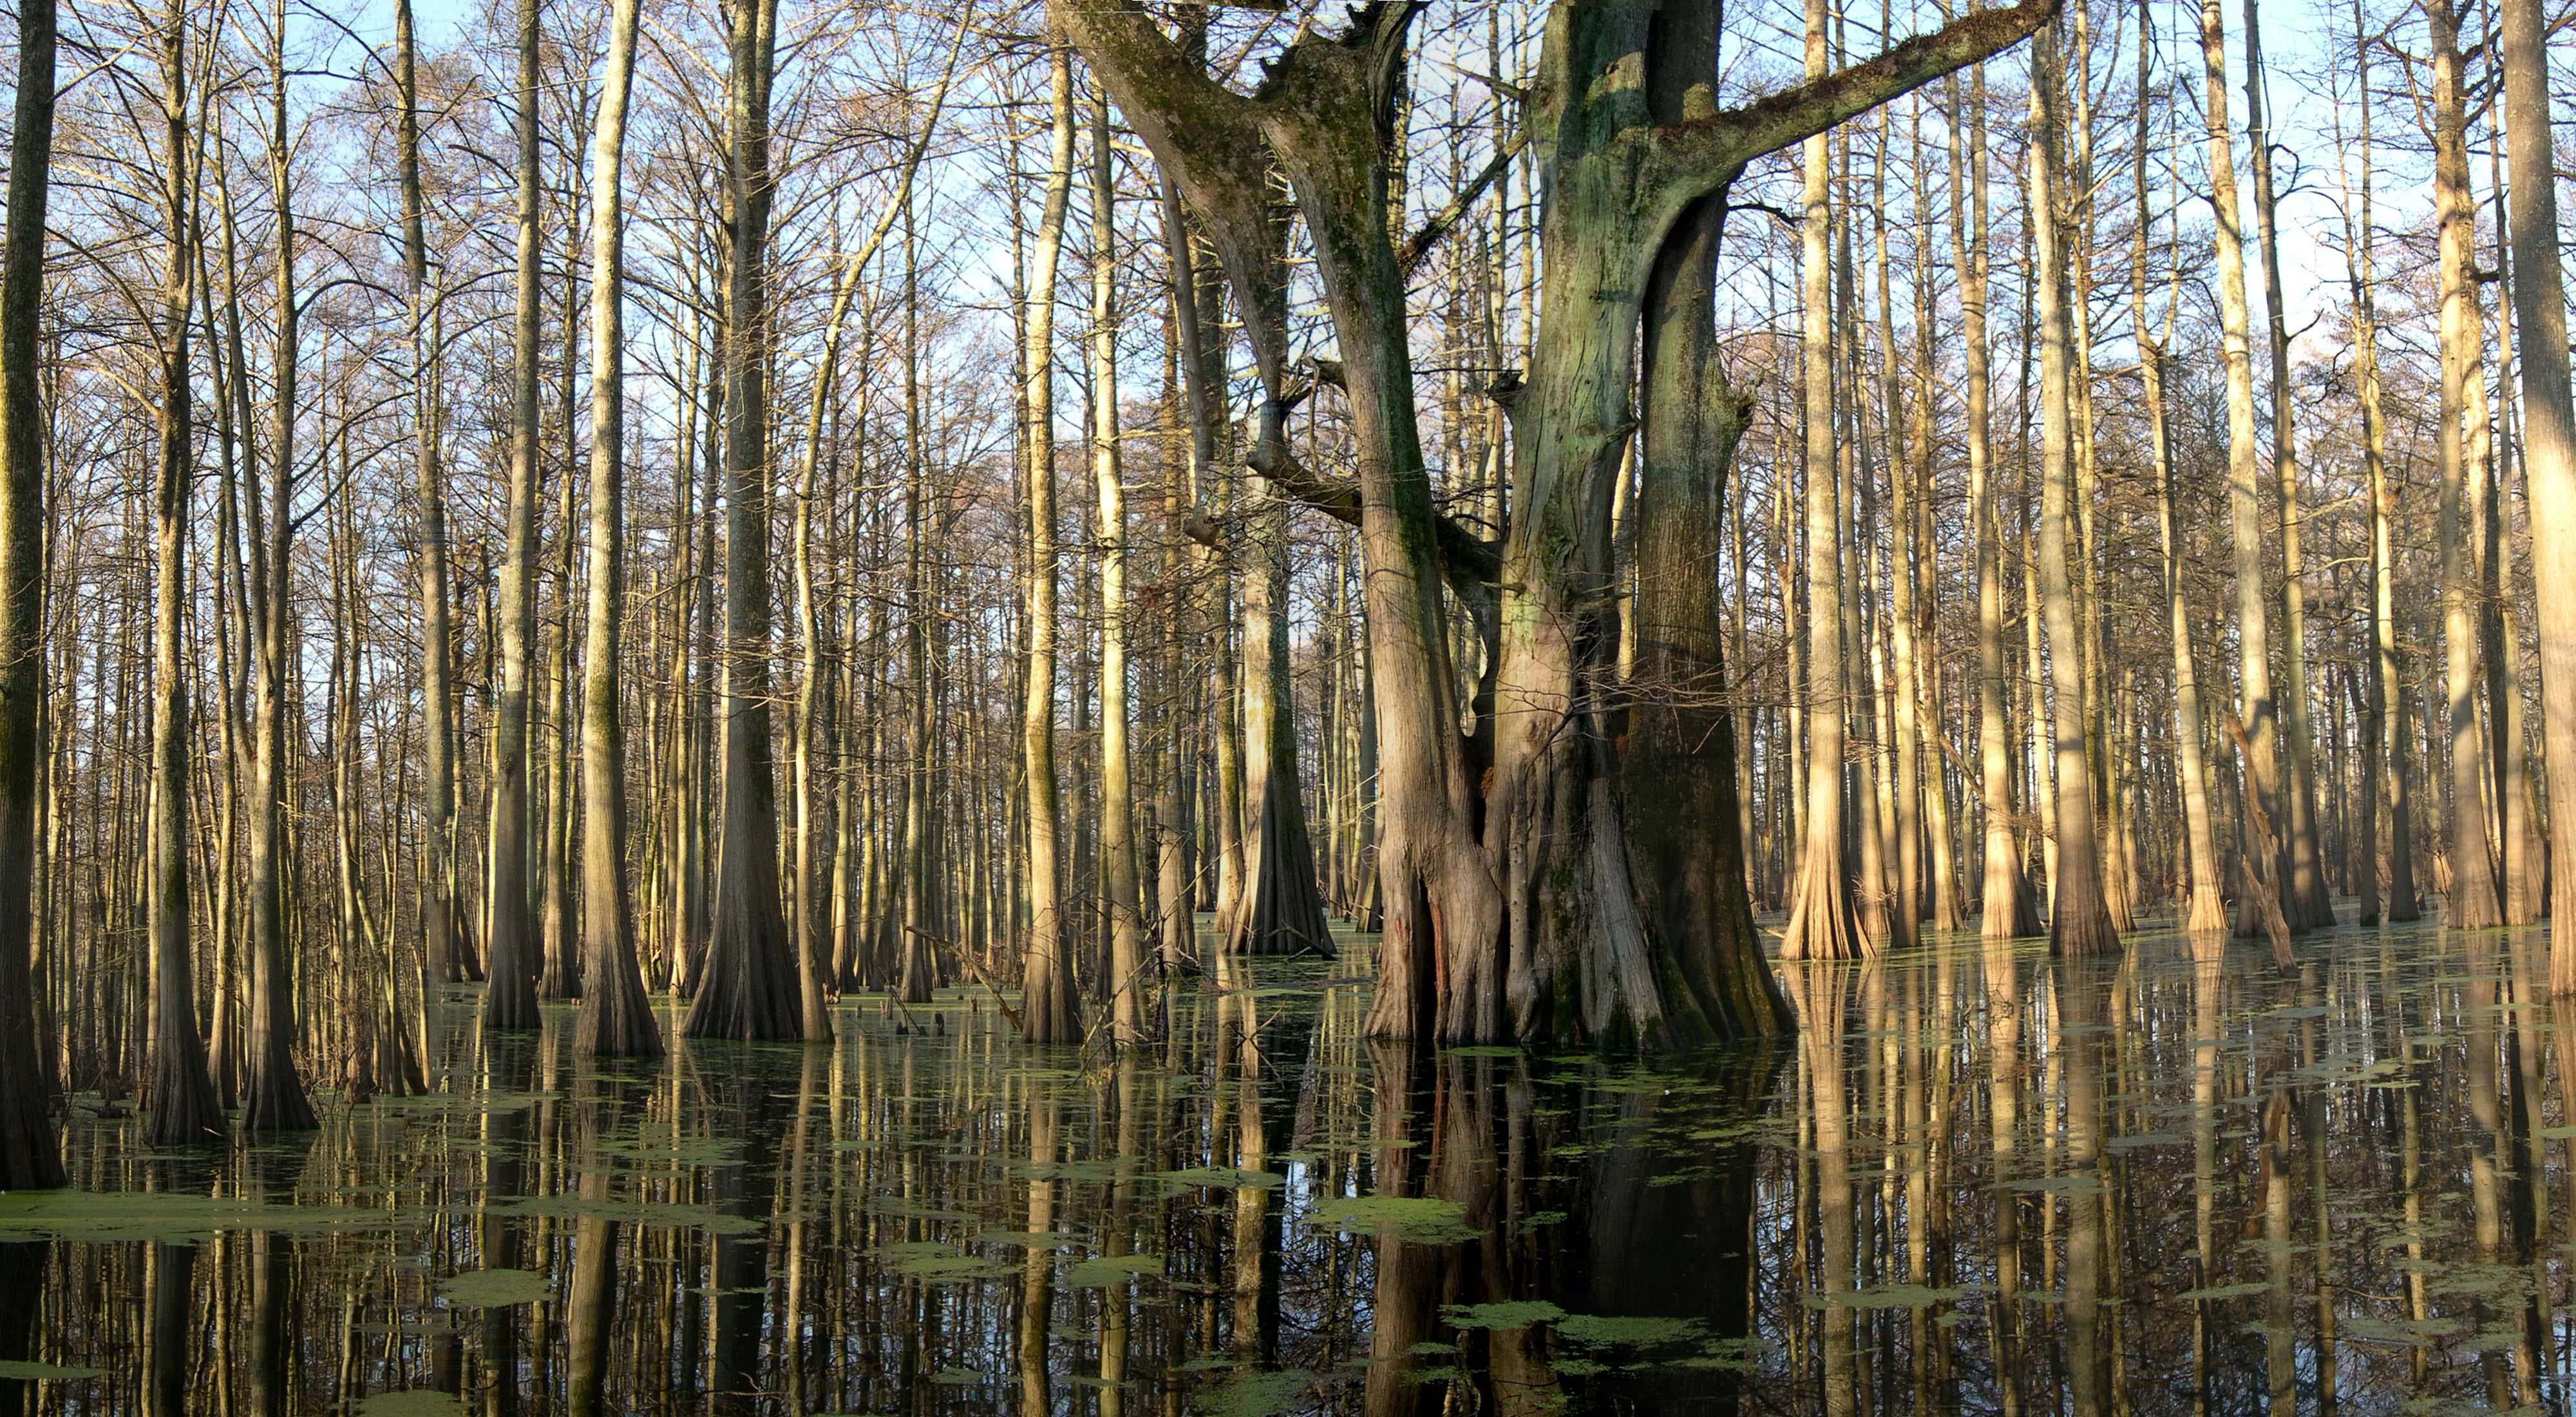 A swampy landscape with tree trunks growing out of water with some floating patches of algae or aquatic plants.